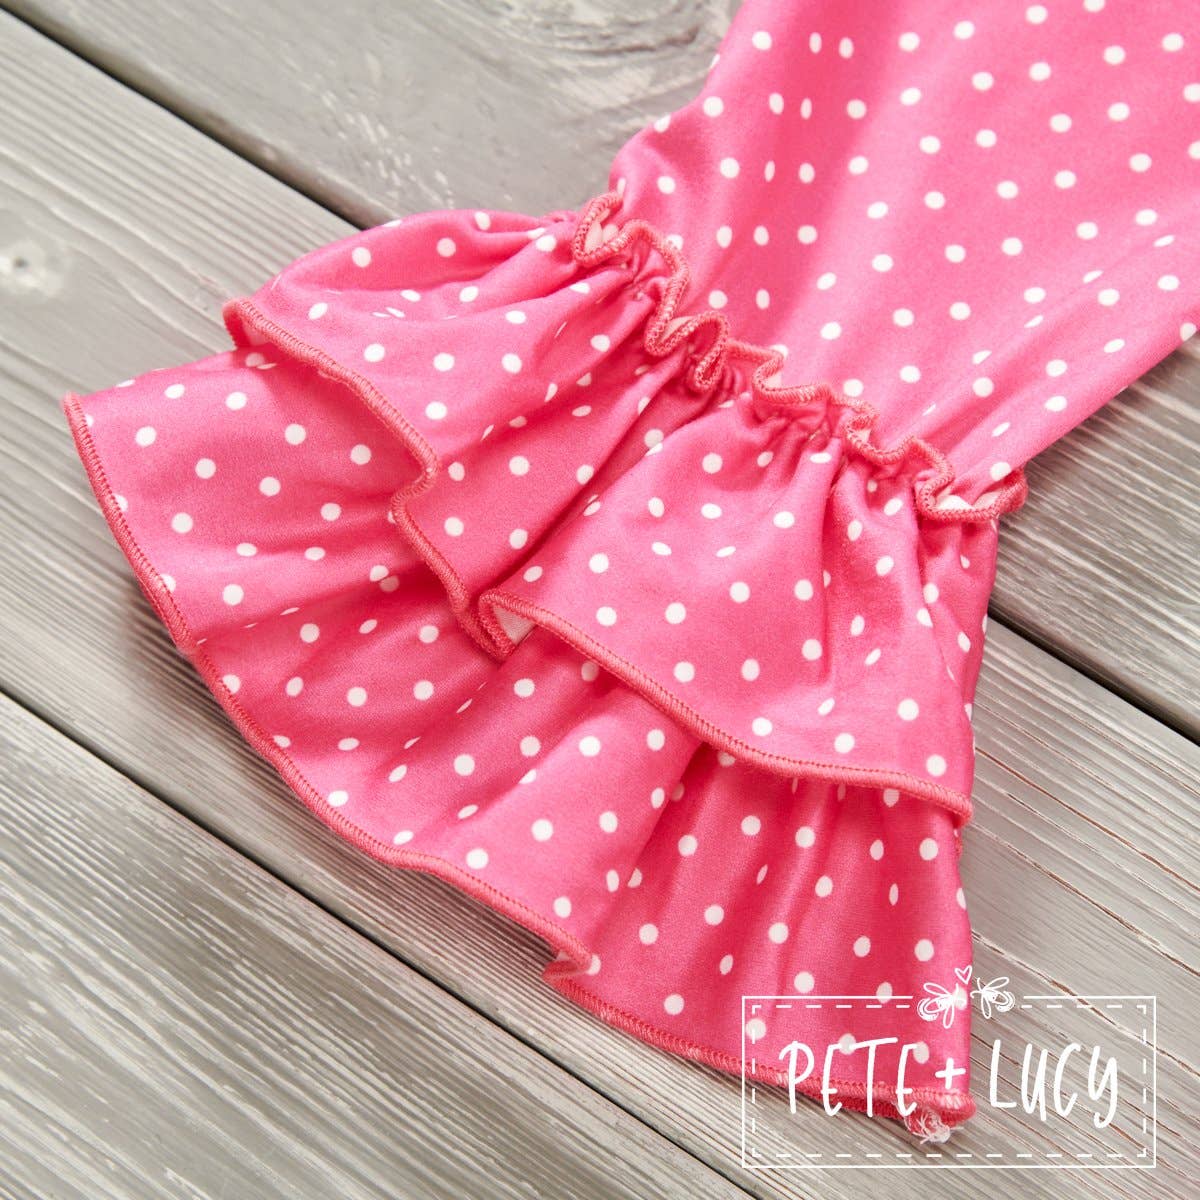 PETE + LUCY Donuts for All 2 Piece Set Pants Babydoll Ruffle Top